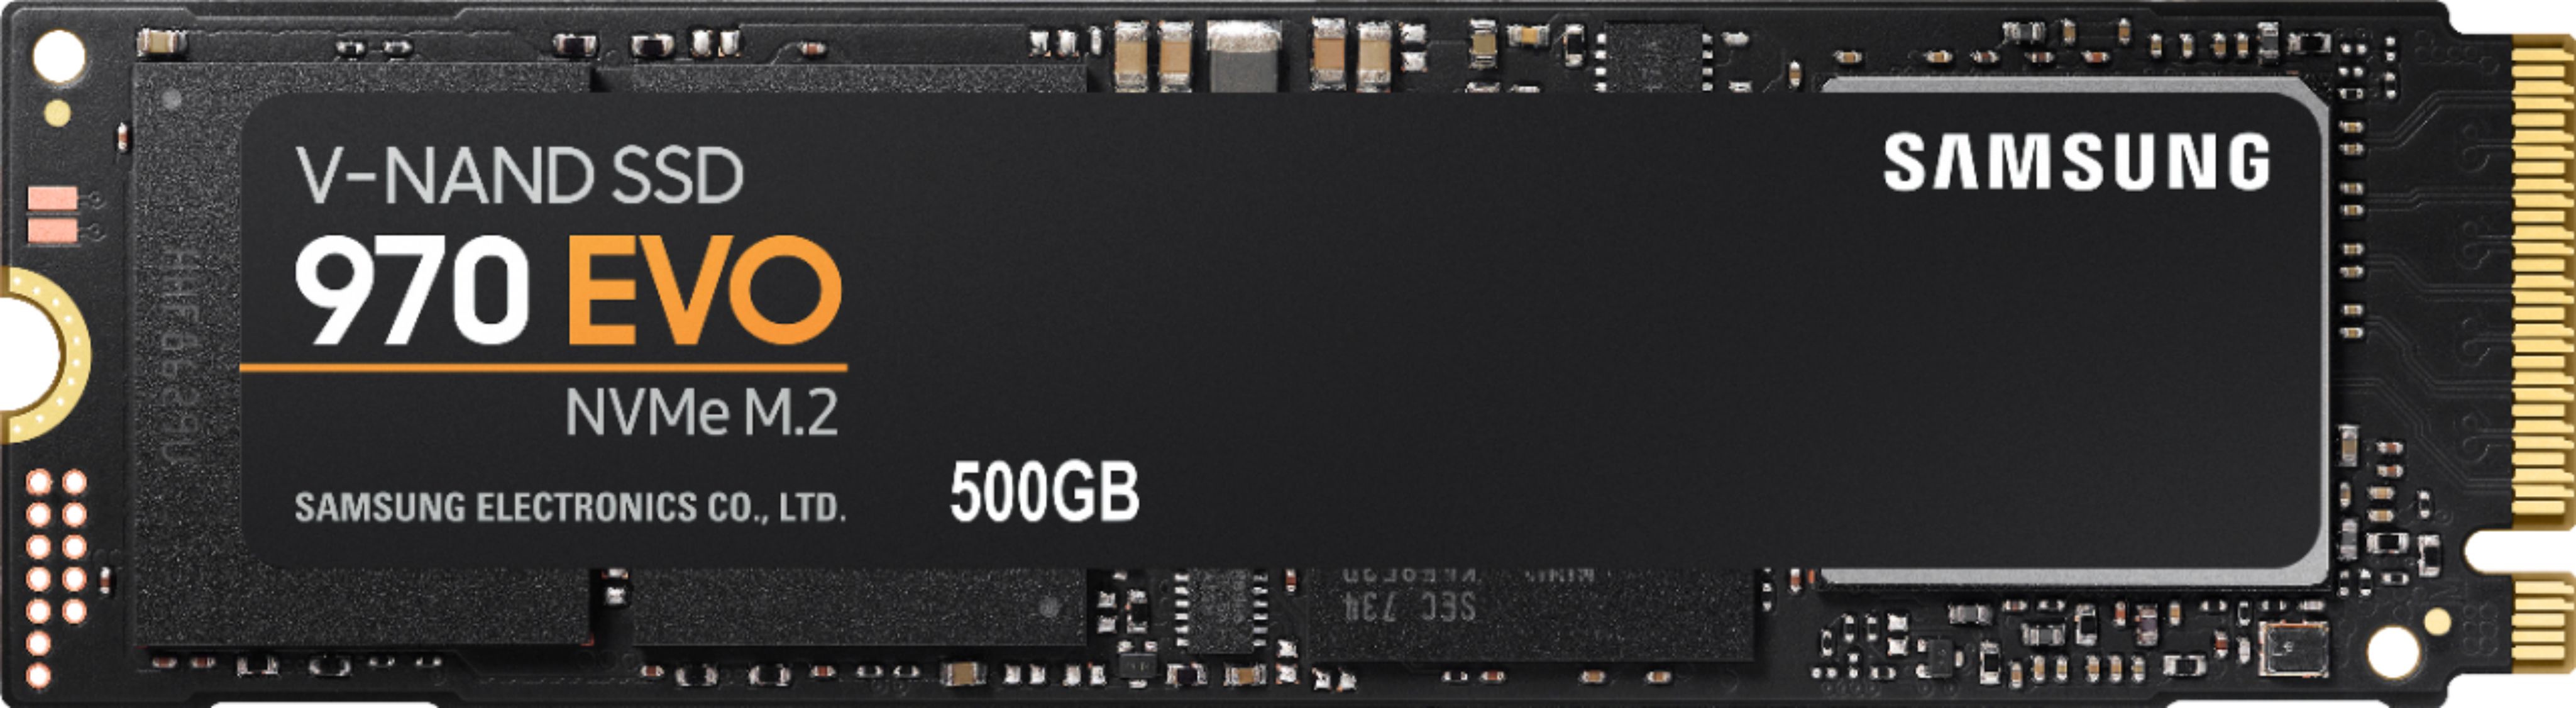 Samsung - 970 EVO 500GB Internal PCI Express 3.0 x4 (NVMe) Solid State Drive with V-NAND Technology